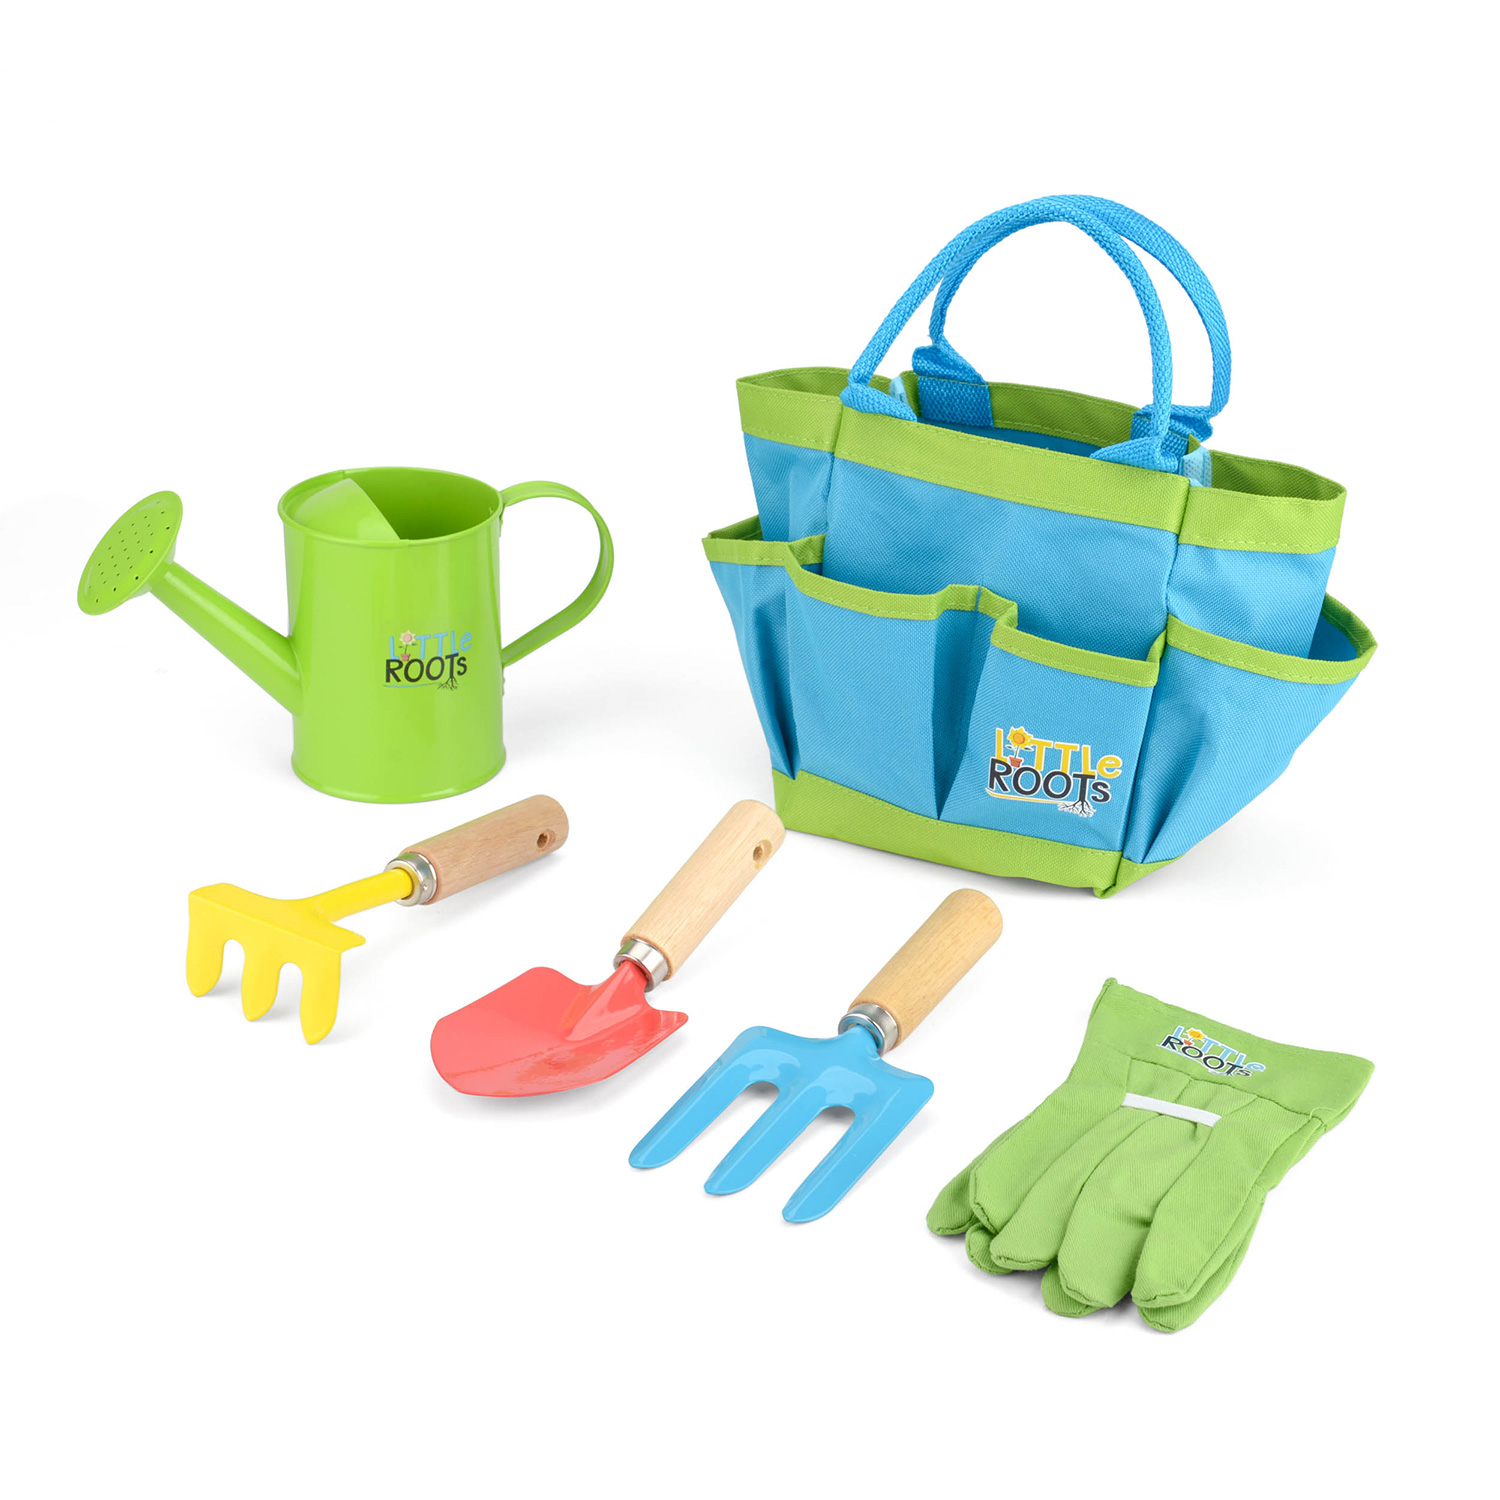 Little Roots garden tool set with bag